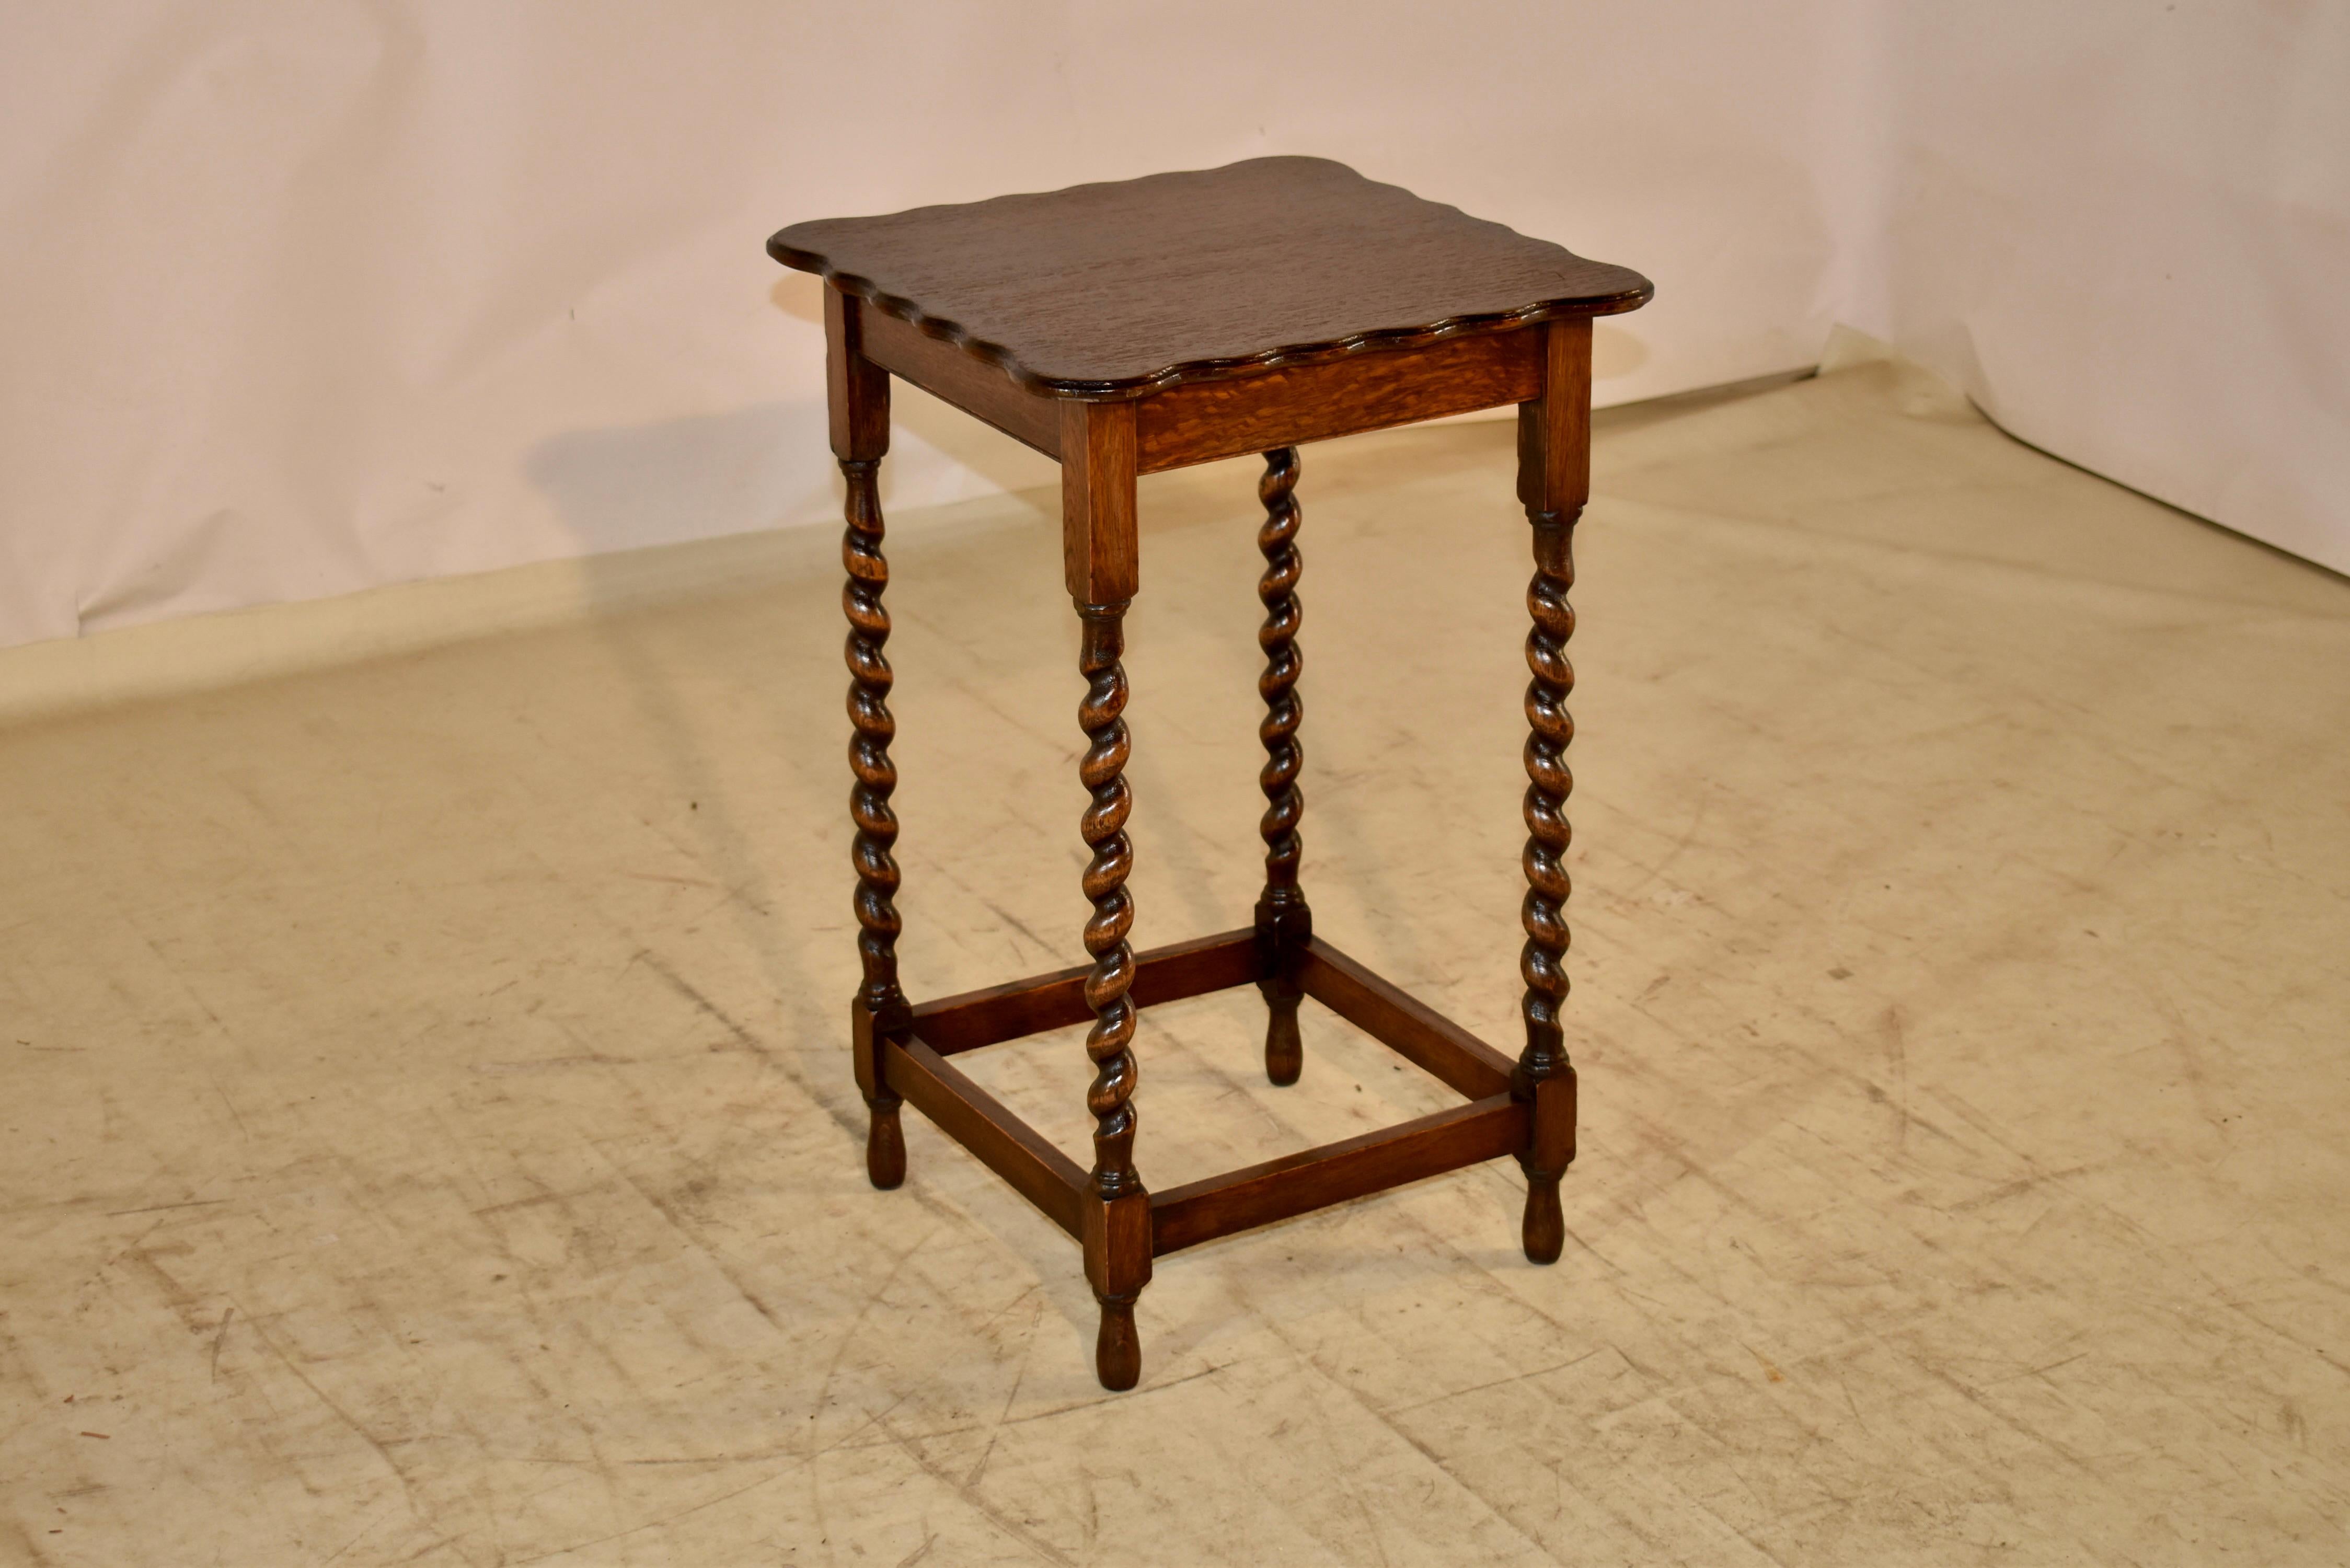 Period Edwardian oak side table from England.  The table is square and the top has a beveled and scalloped edge,  following down to a simple apron. The table is supported on hand tuned barley twist legs, joined by simple stretchers and raised on